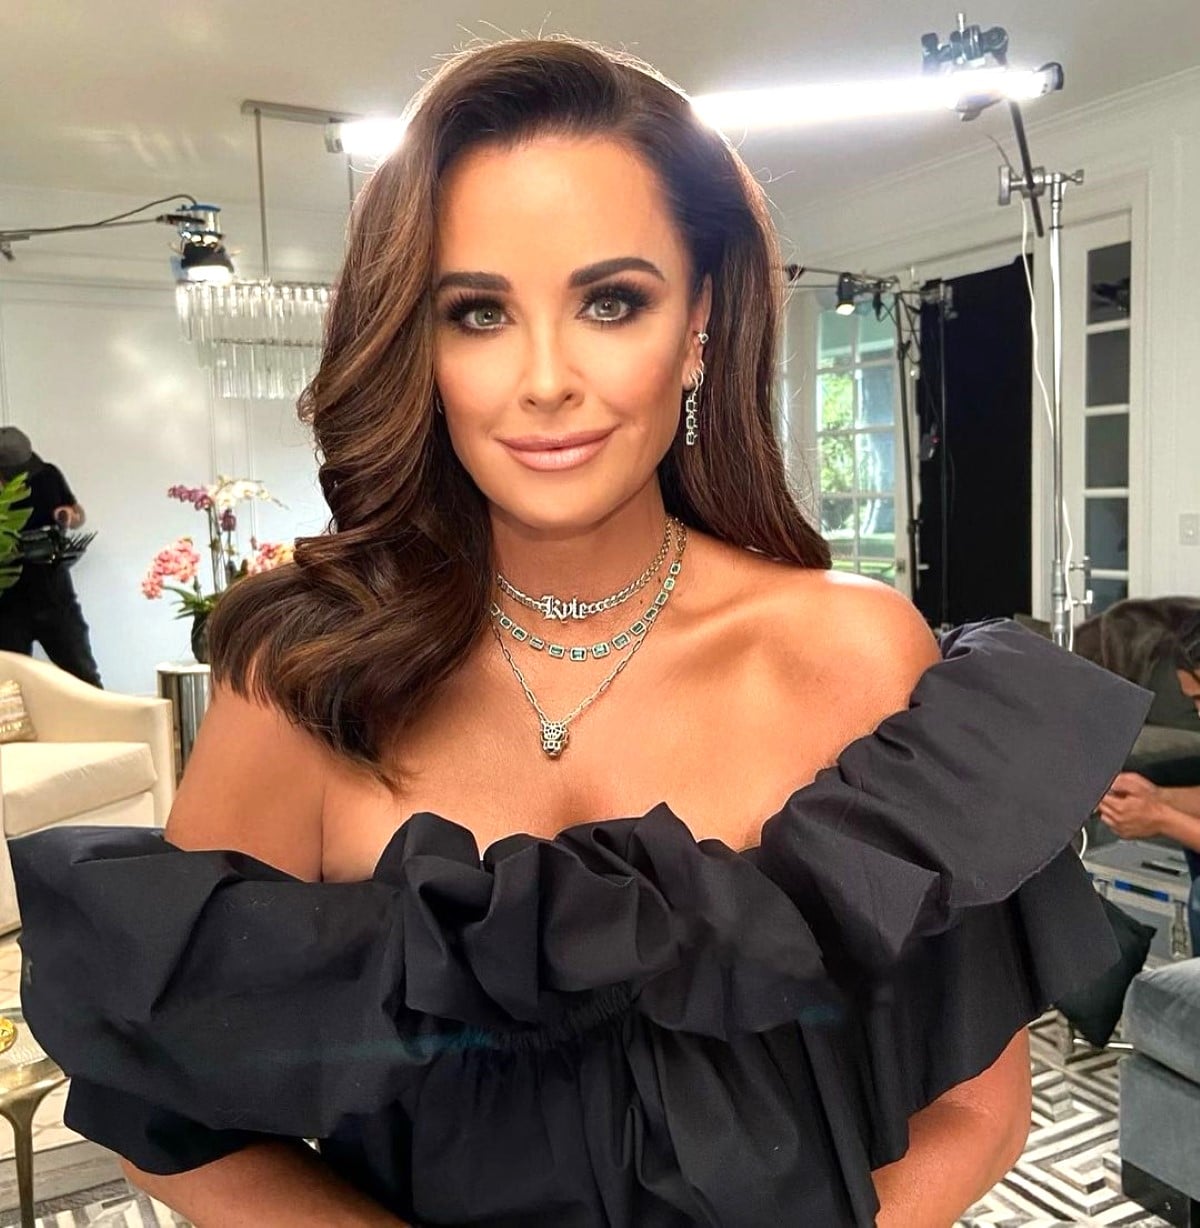 Kyle Richards Discusses Mom's Mistakes, If Daughters Are Like Her and Sisters, & Update With Kathy, Plus Mauricio's Reaction to Split Comments on RHOBH, If They're Still Intimate and How Public Impacted Breakup